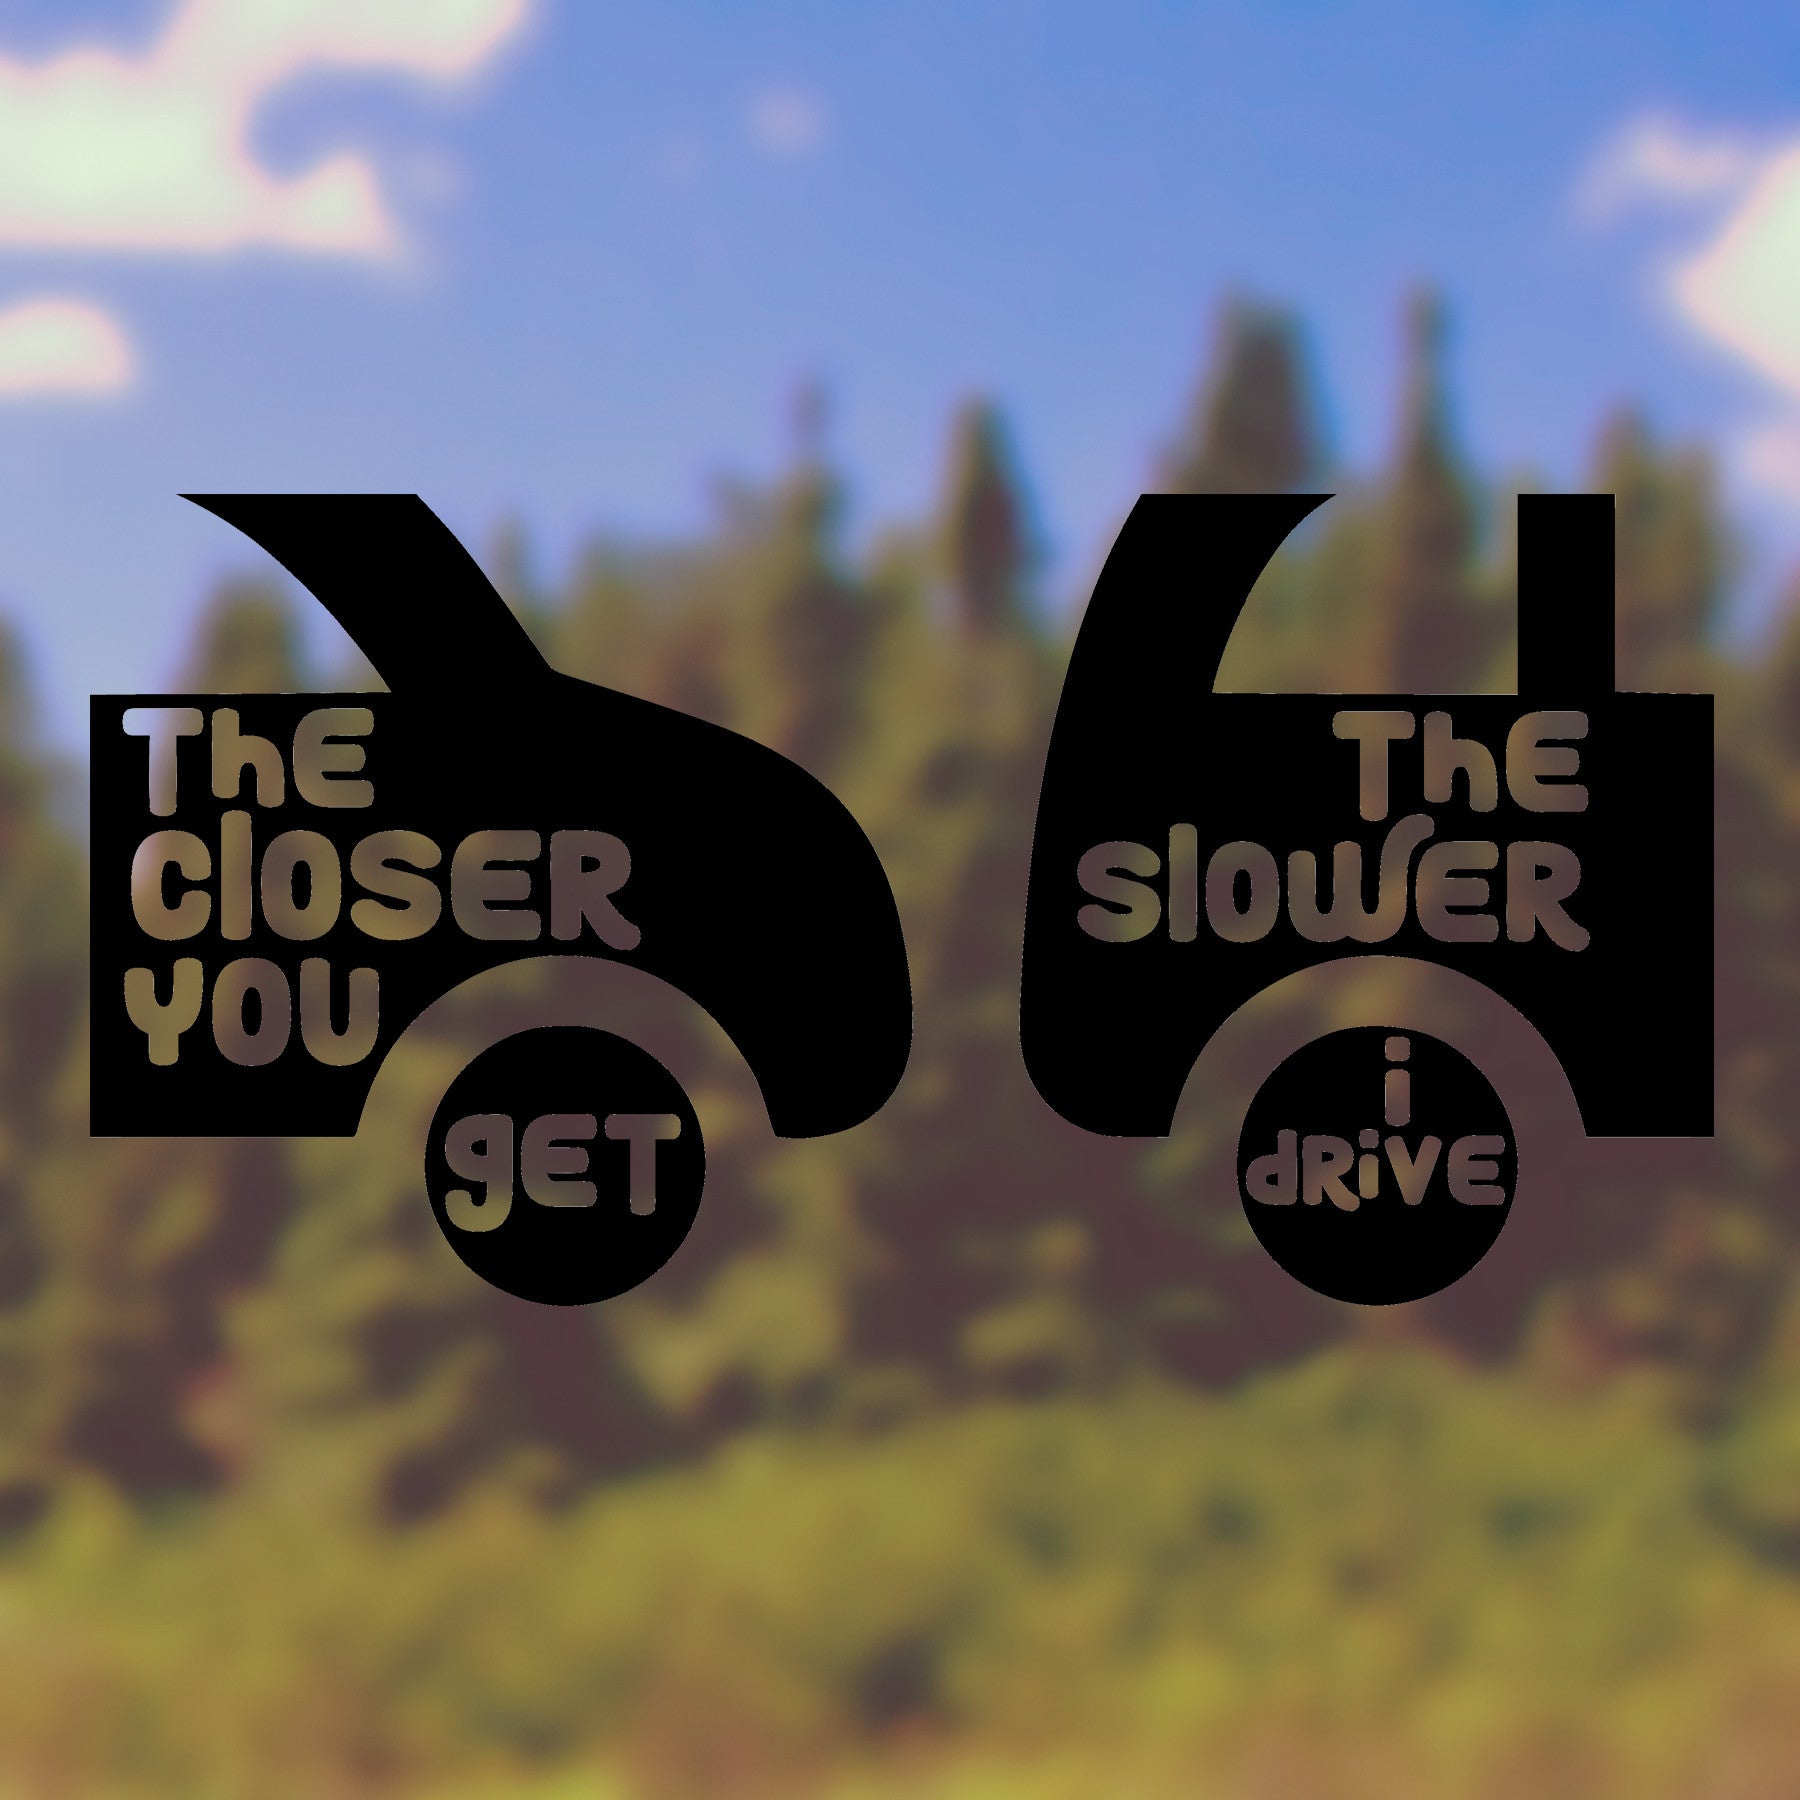 The closer you get the slower I drive | Bumper sticker - Adnil Creations